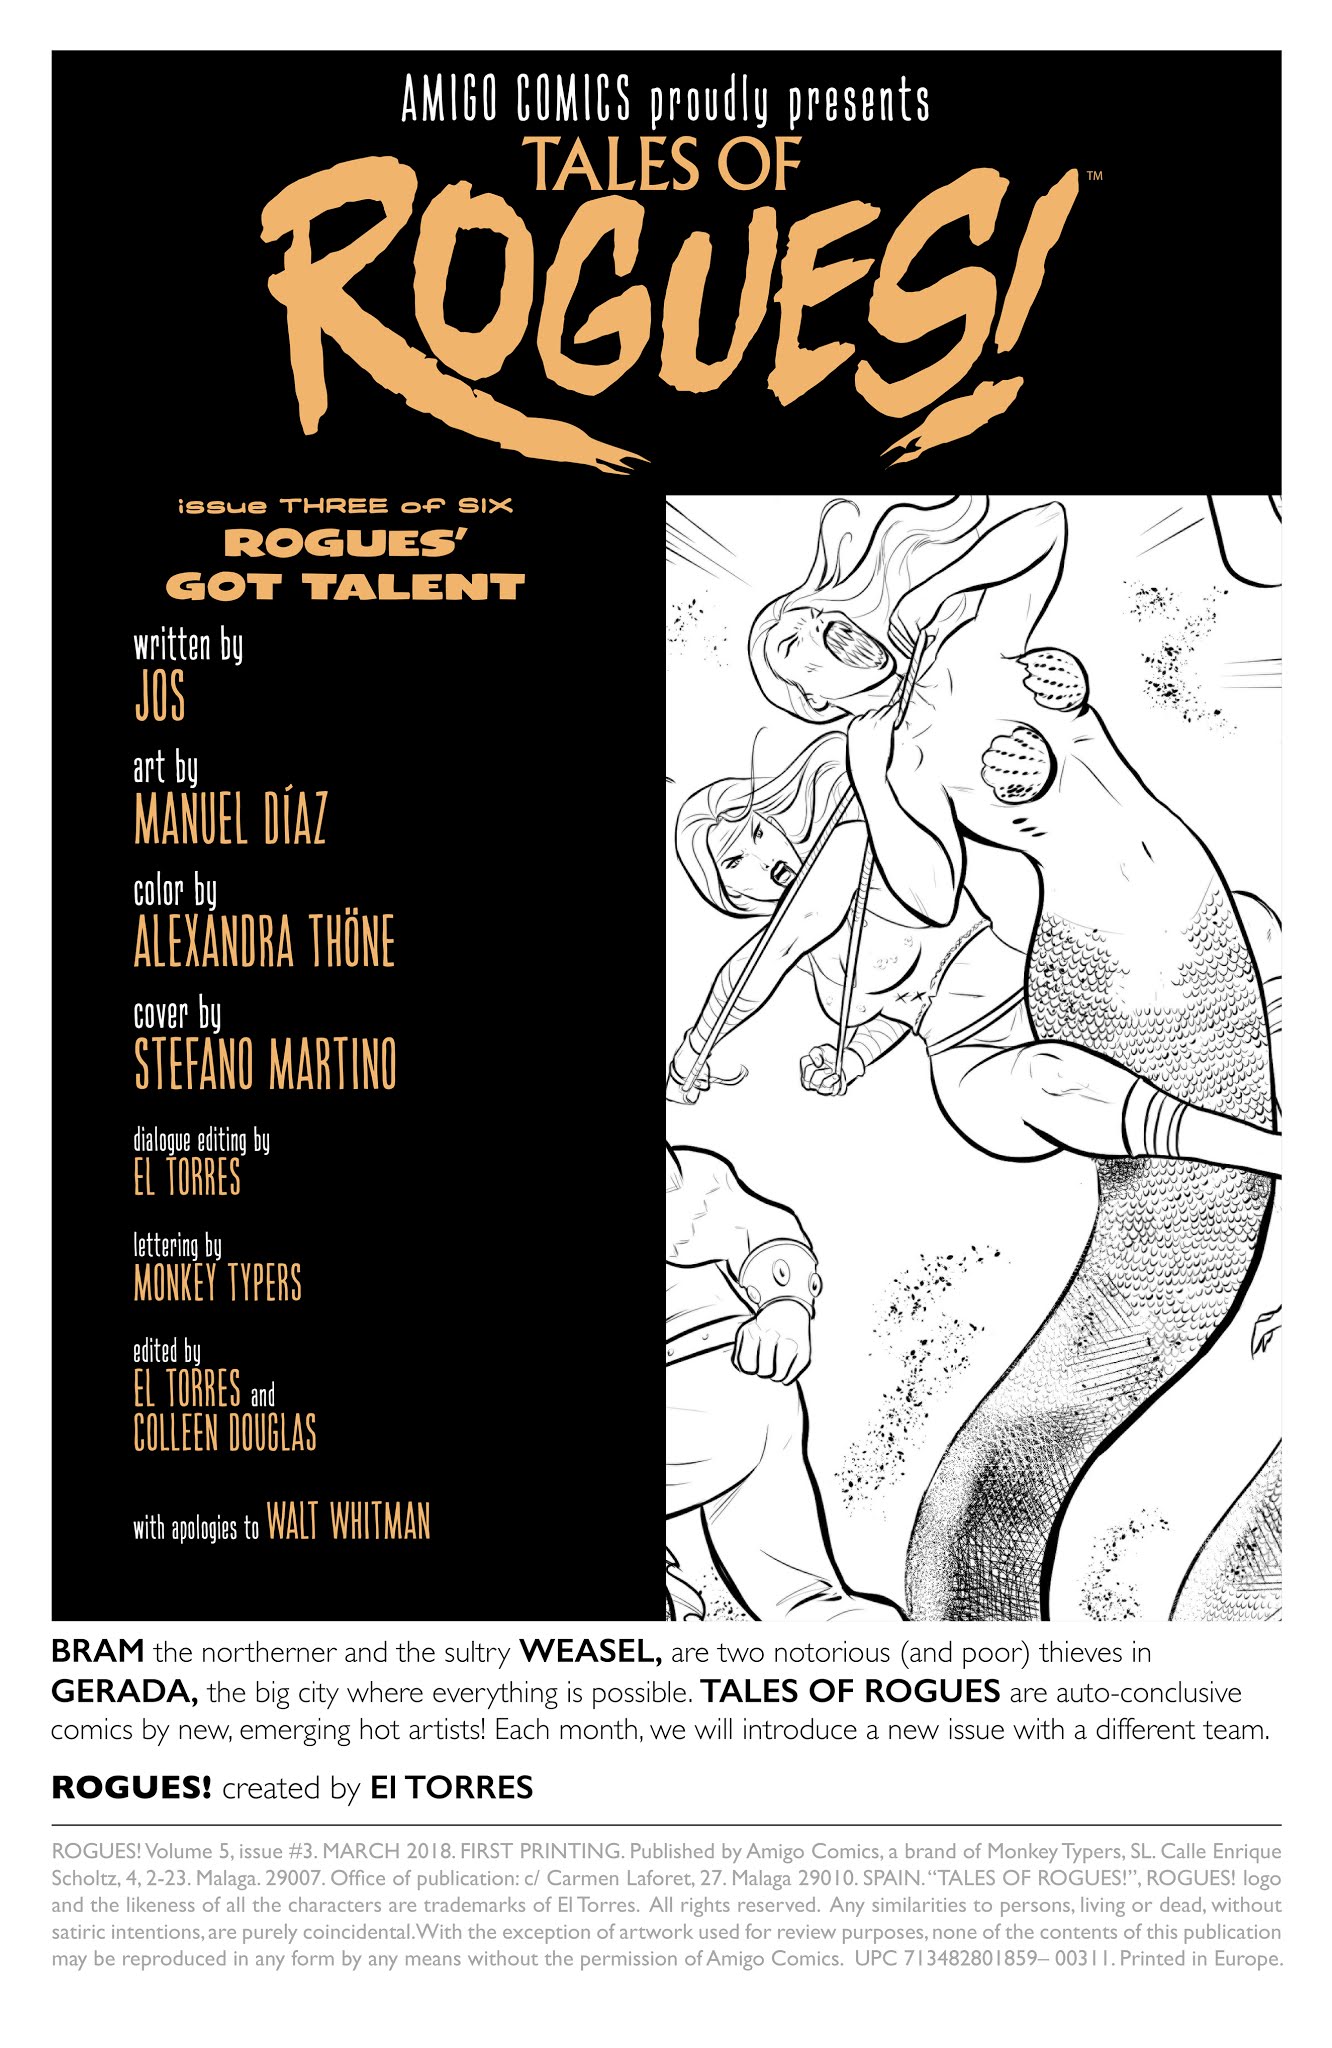 Read online Tales of Rogues! comic -  Issue #3 - 2